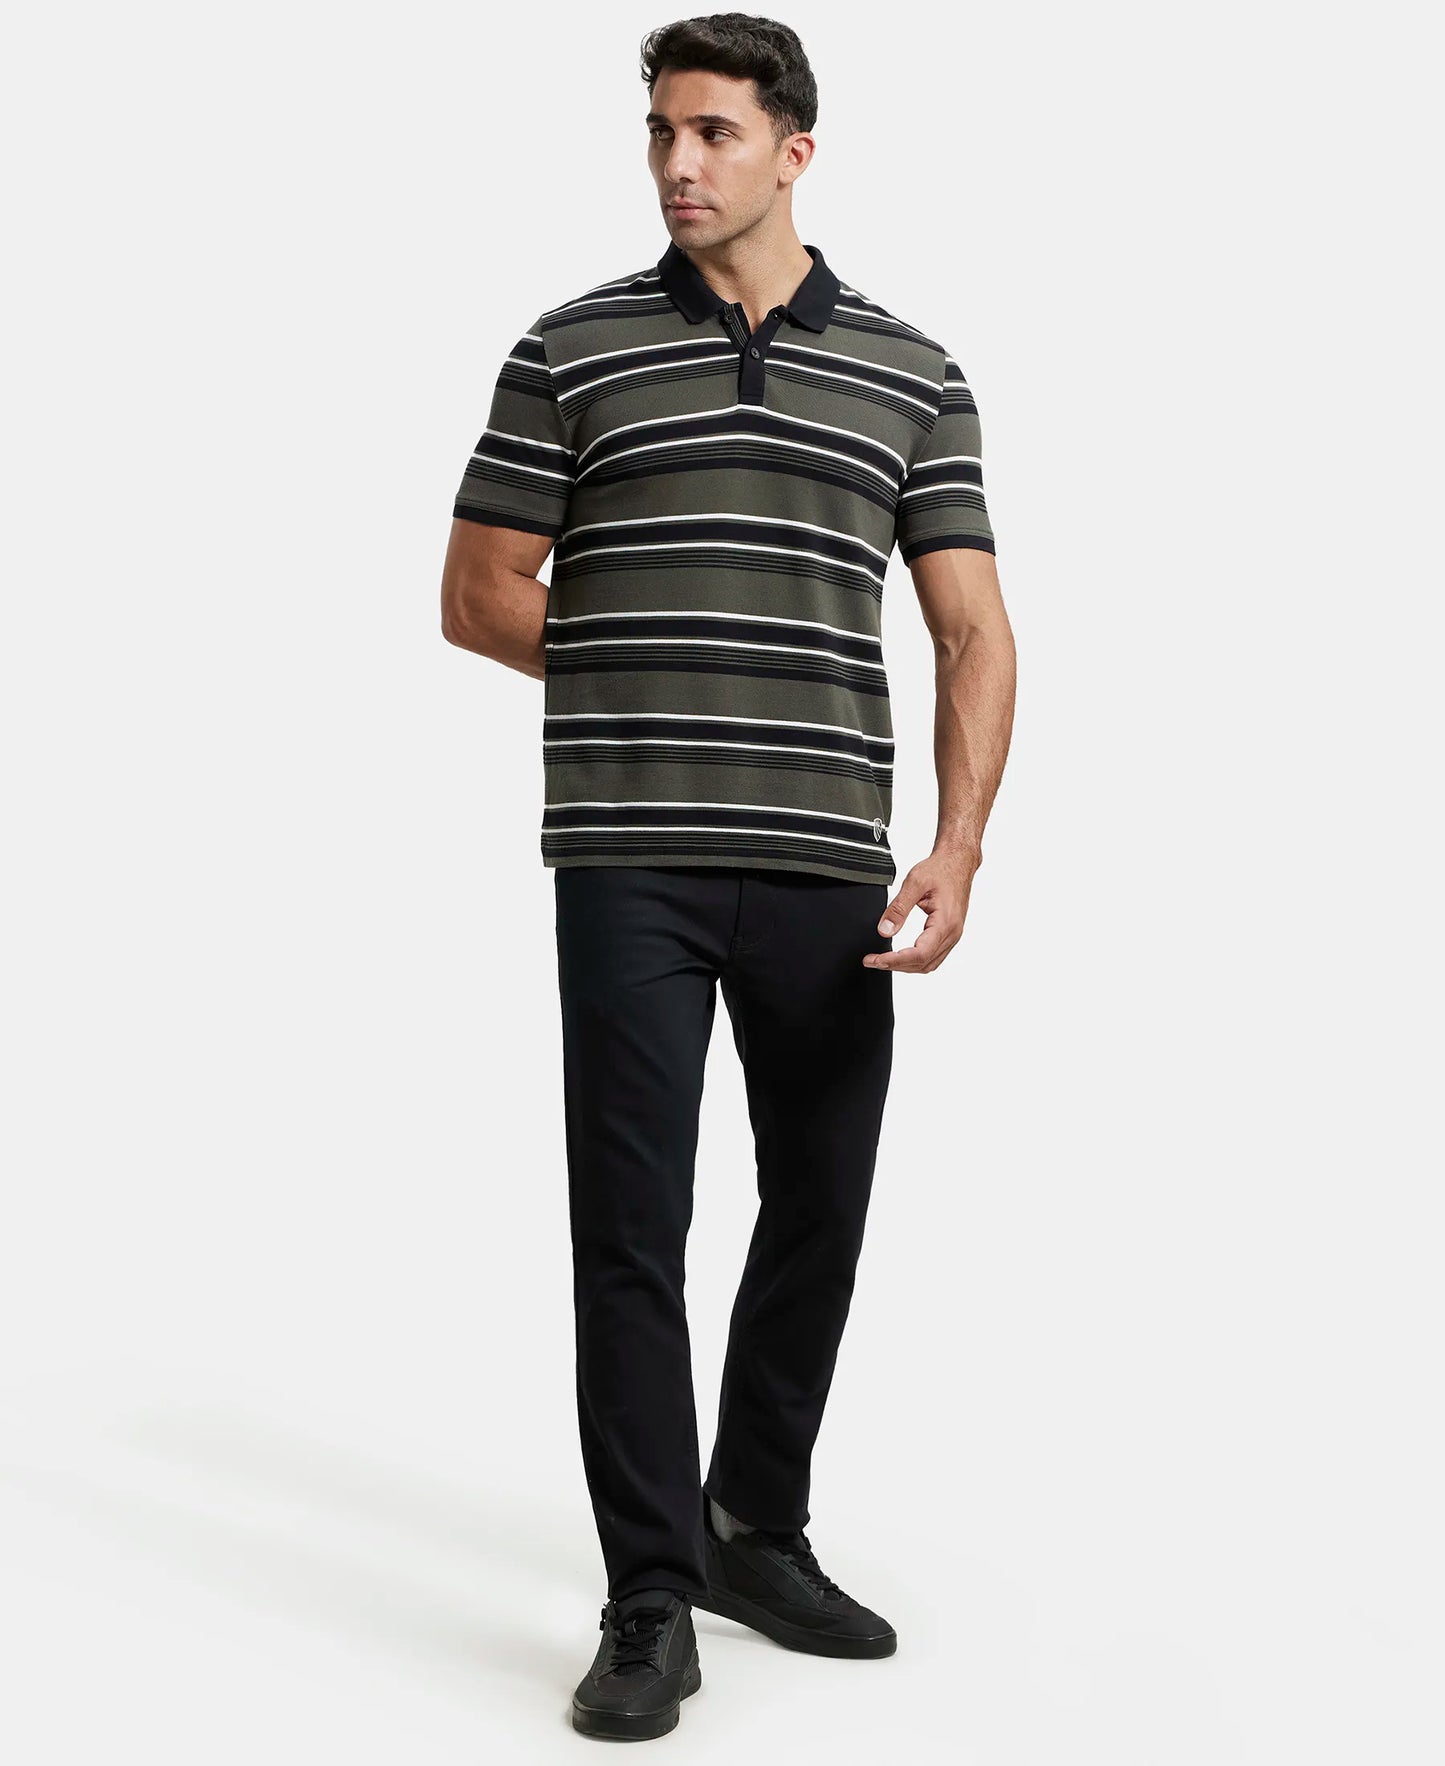 Super Combed Cotton Rich Striped Polo T-Shirt - Black & Deep Olive-4